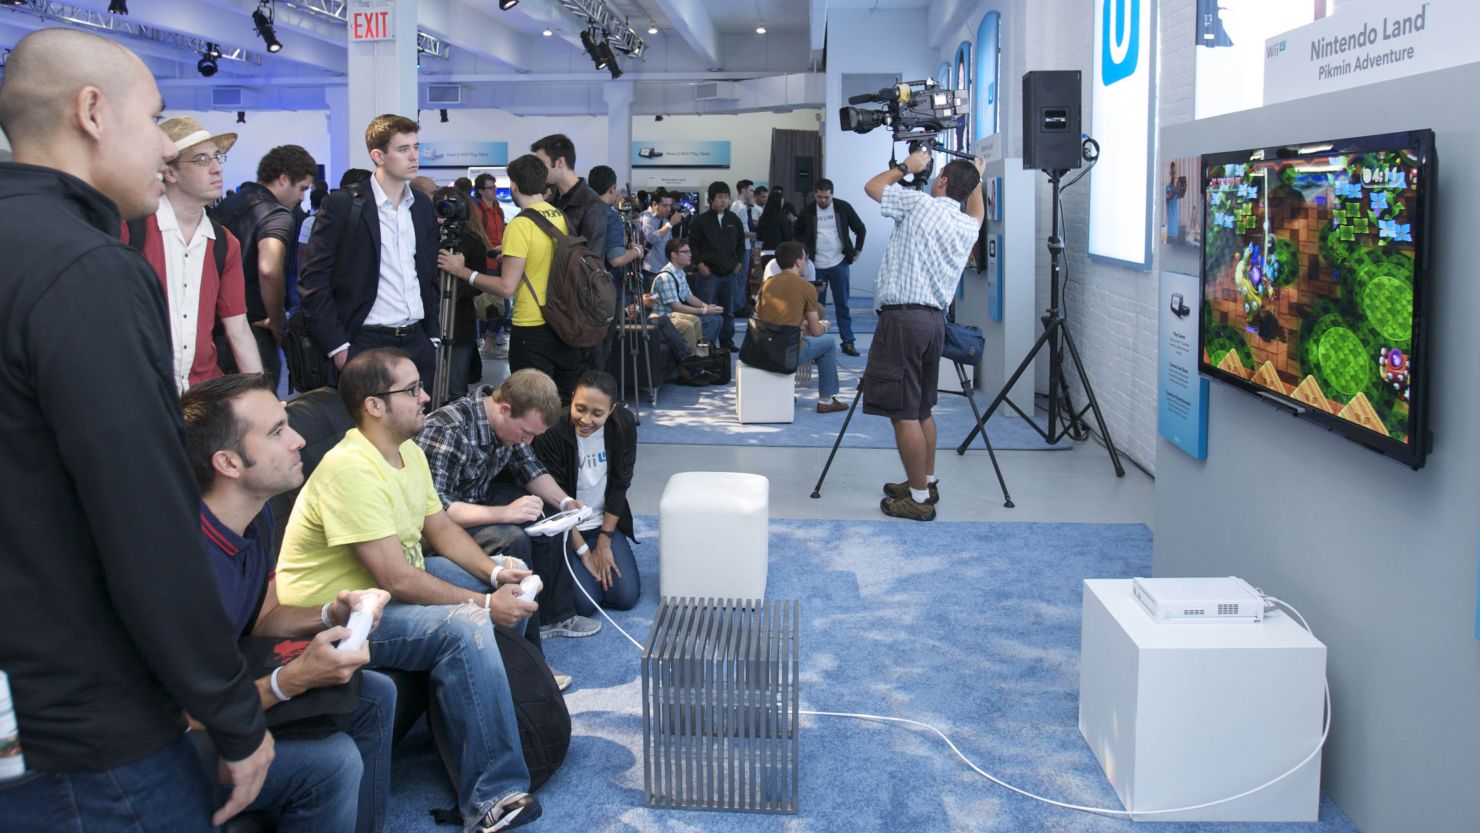 Members of the gaming media play "Nintendo Land" at a press event for the Nintendo Wii U on Thursday.